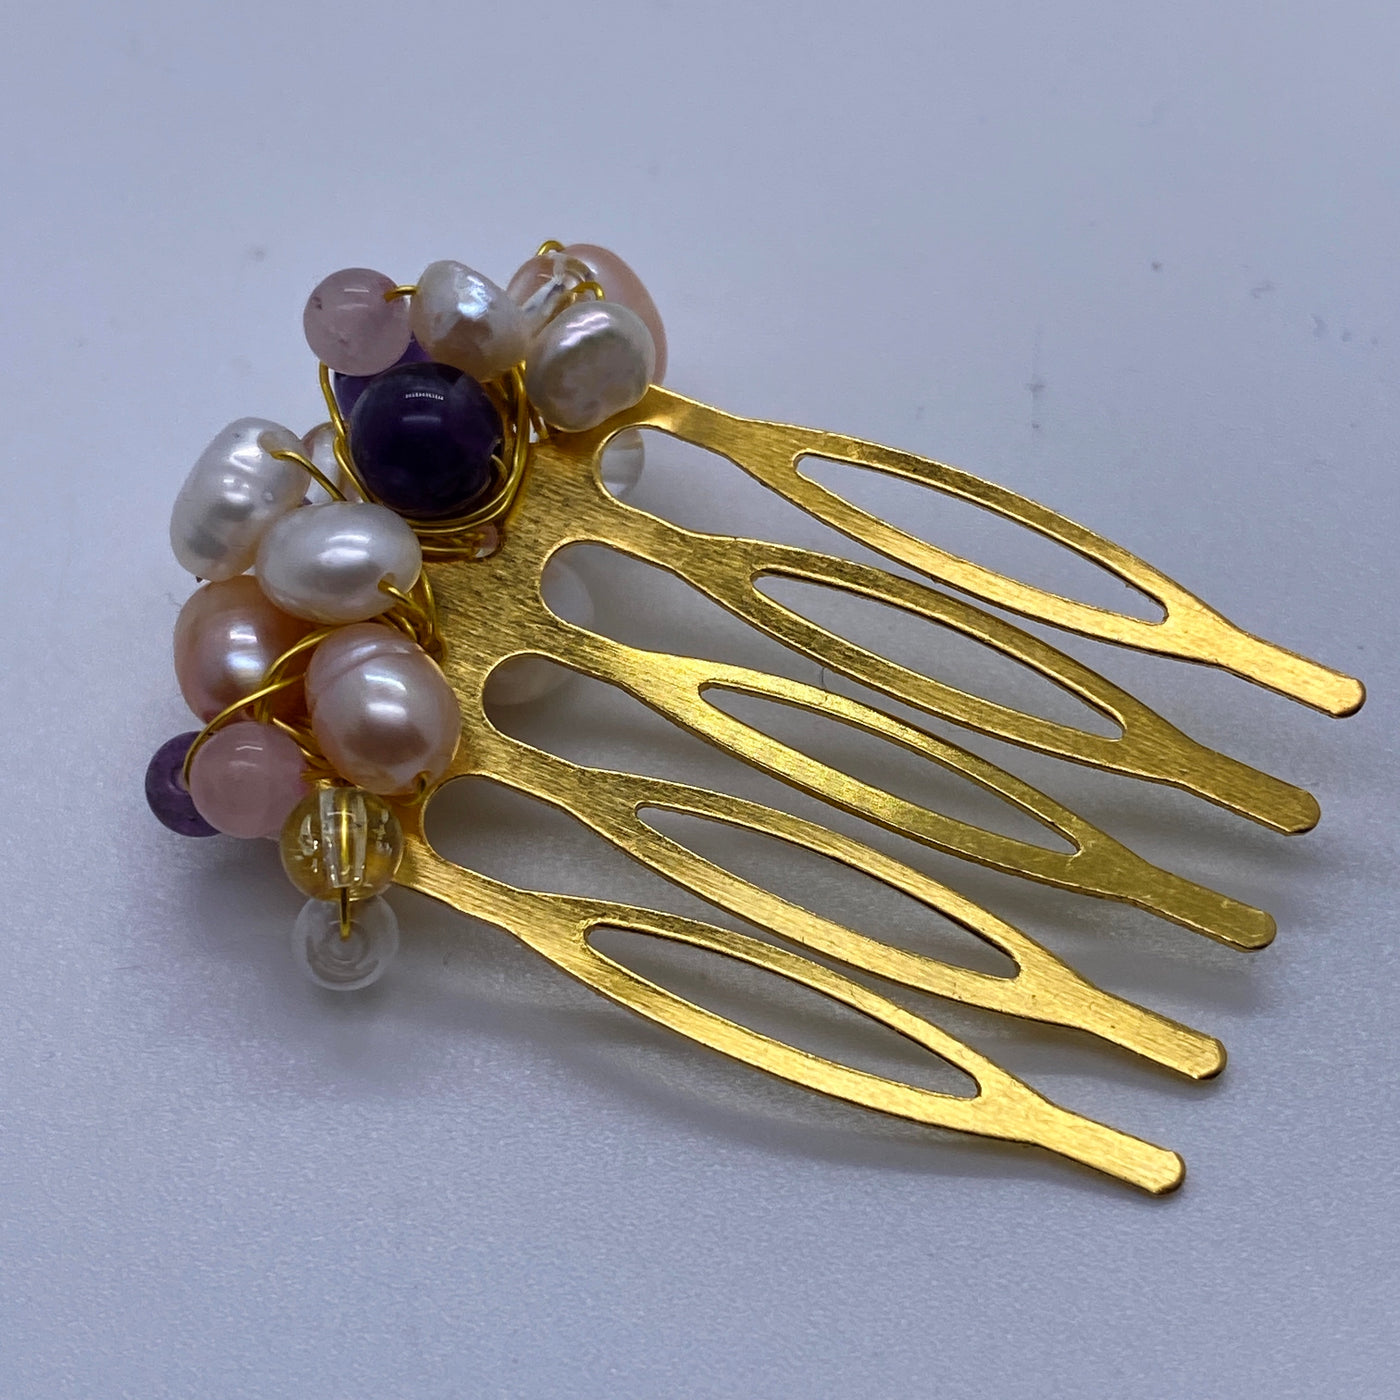 Freshwater pearls in different measures and colors (rose, white), chrystal and rose quartz beads, amethysts and golden wire for this hair combs simple tuck five teeth metal combs gold color